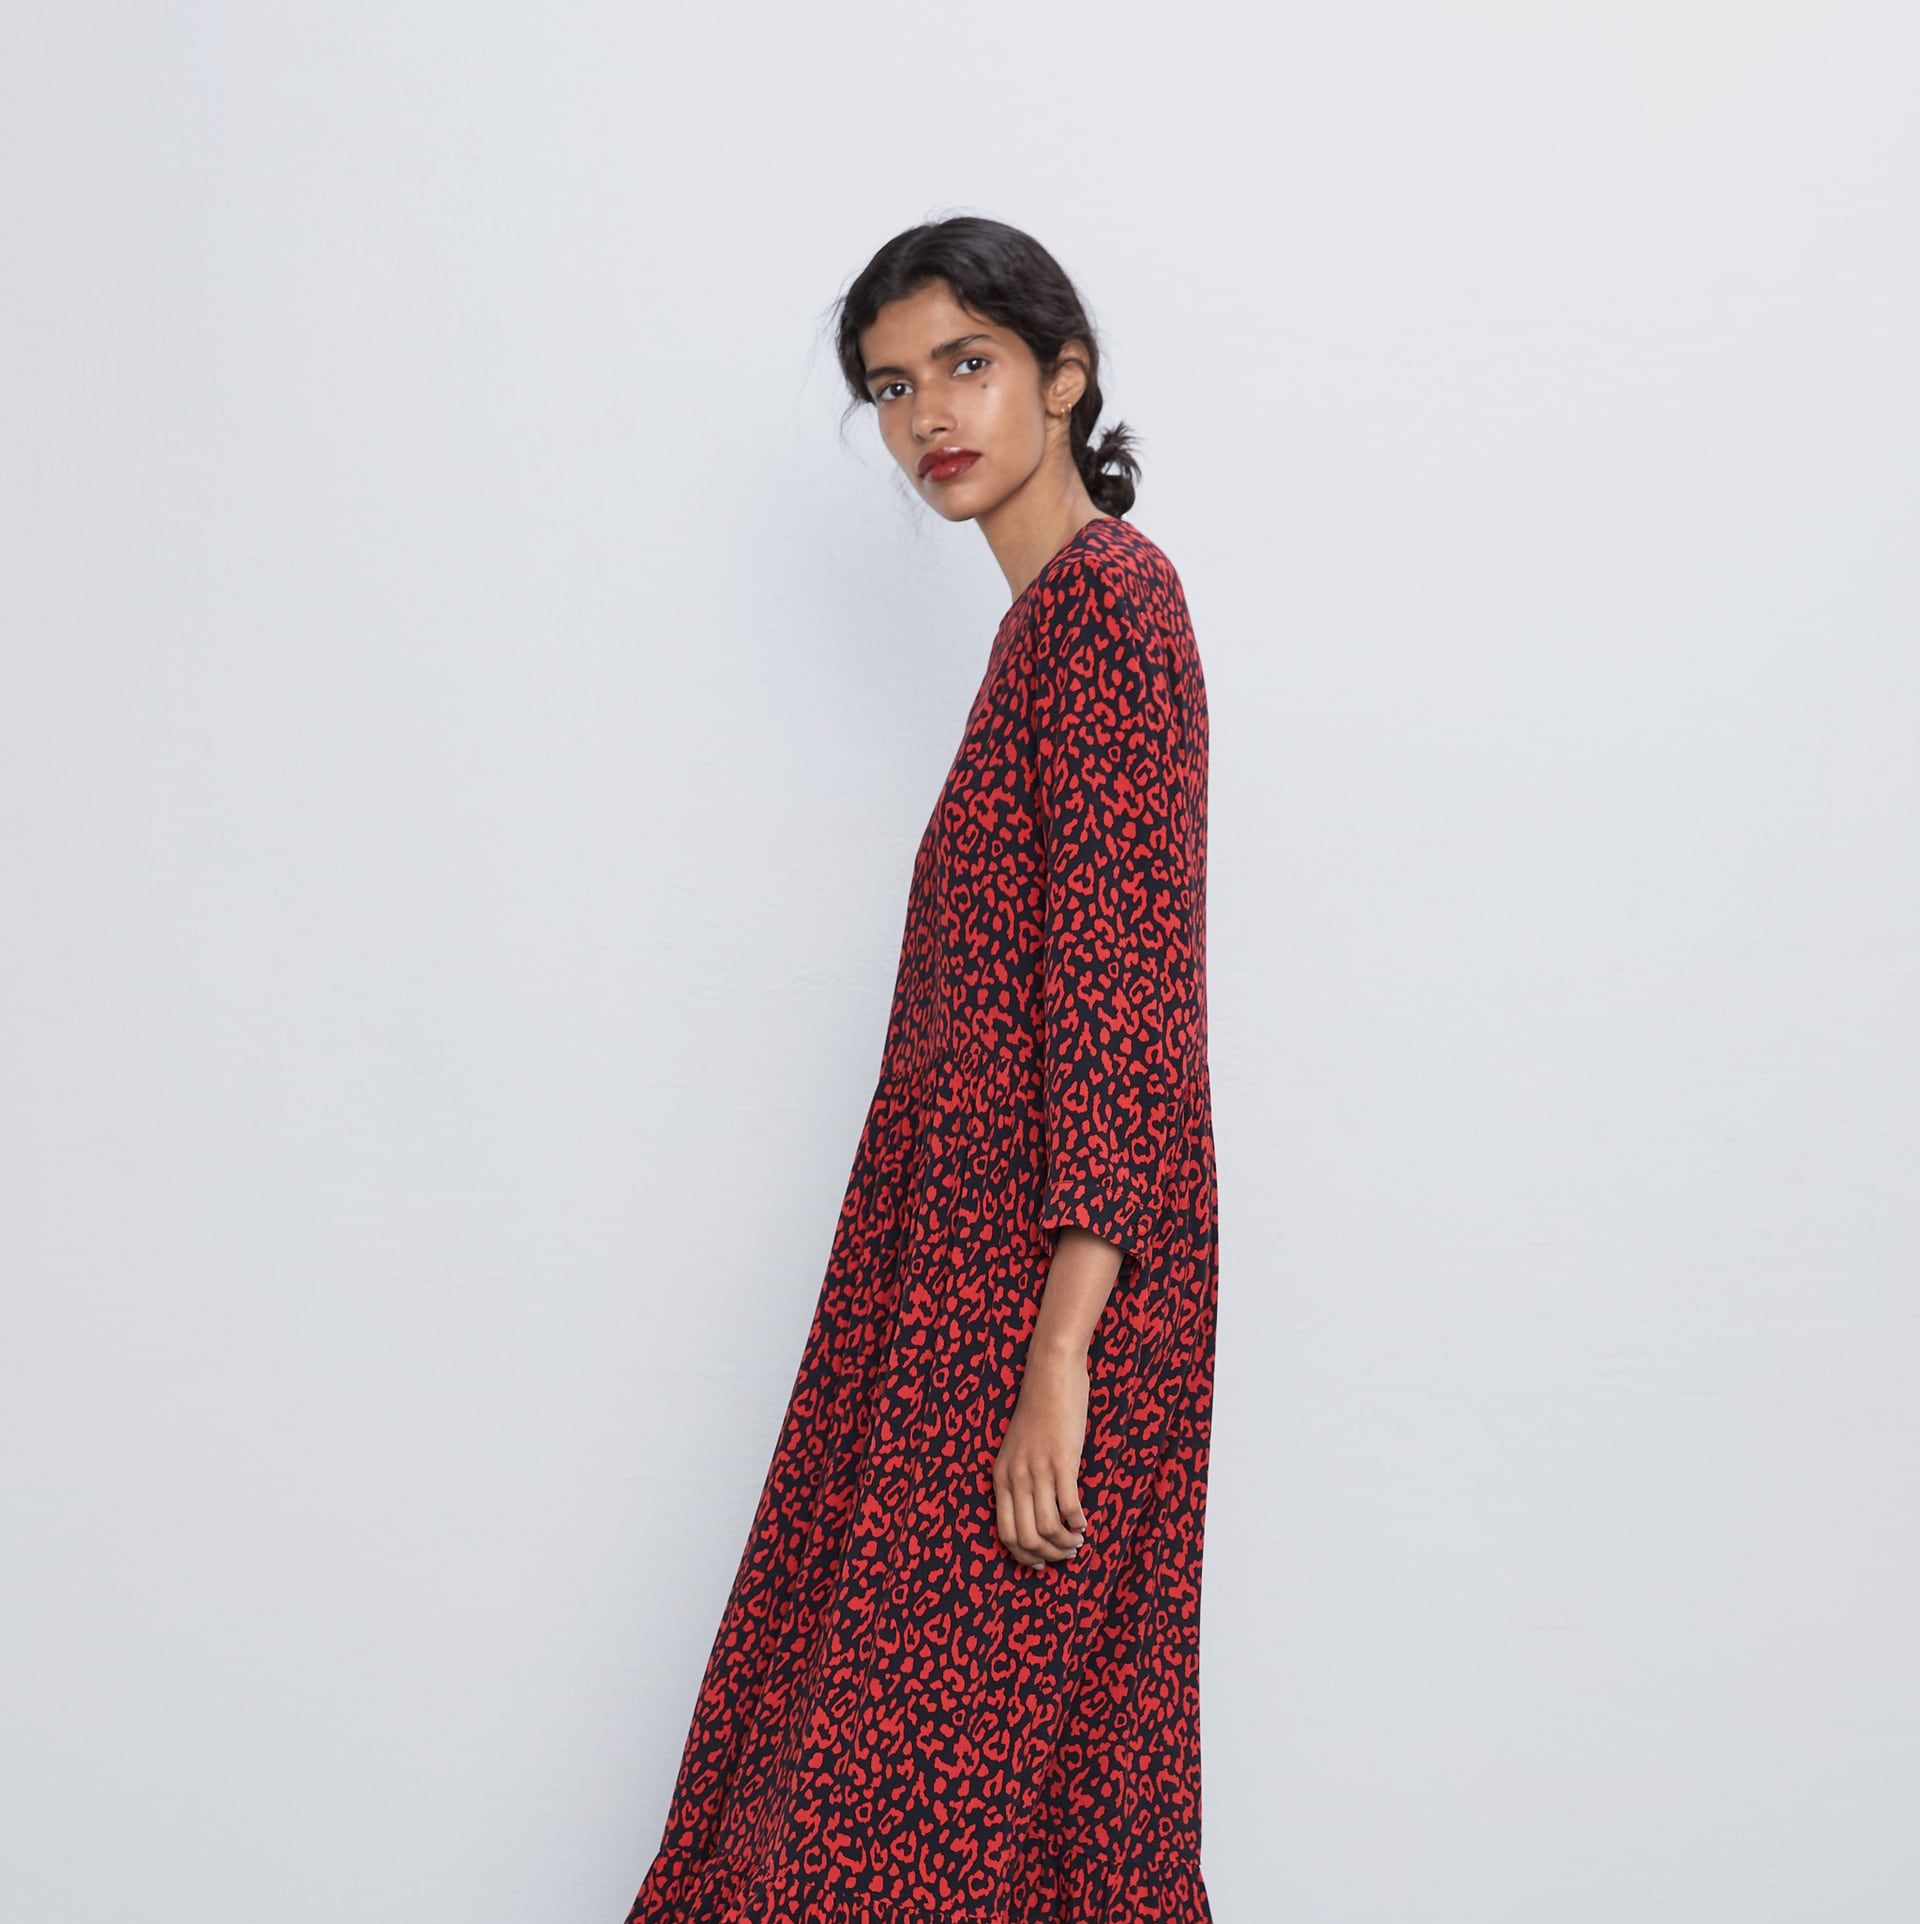 You can now buy THAT Zara polka dot dress in red leopard print